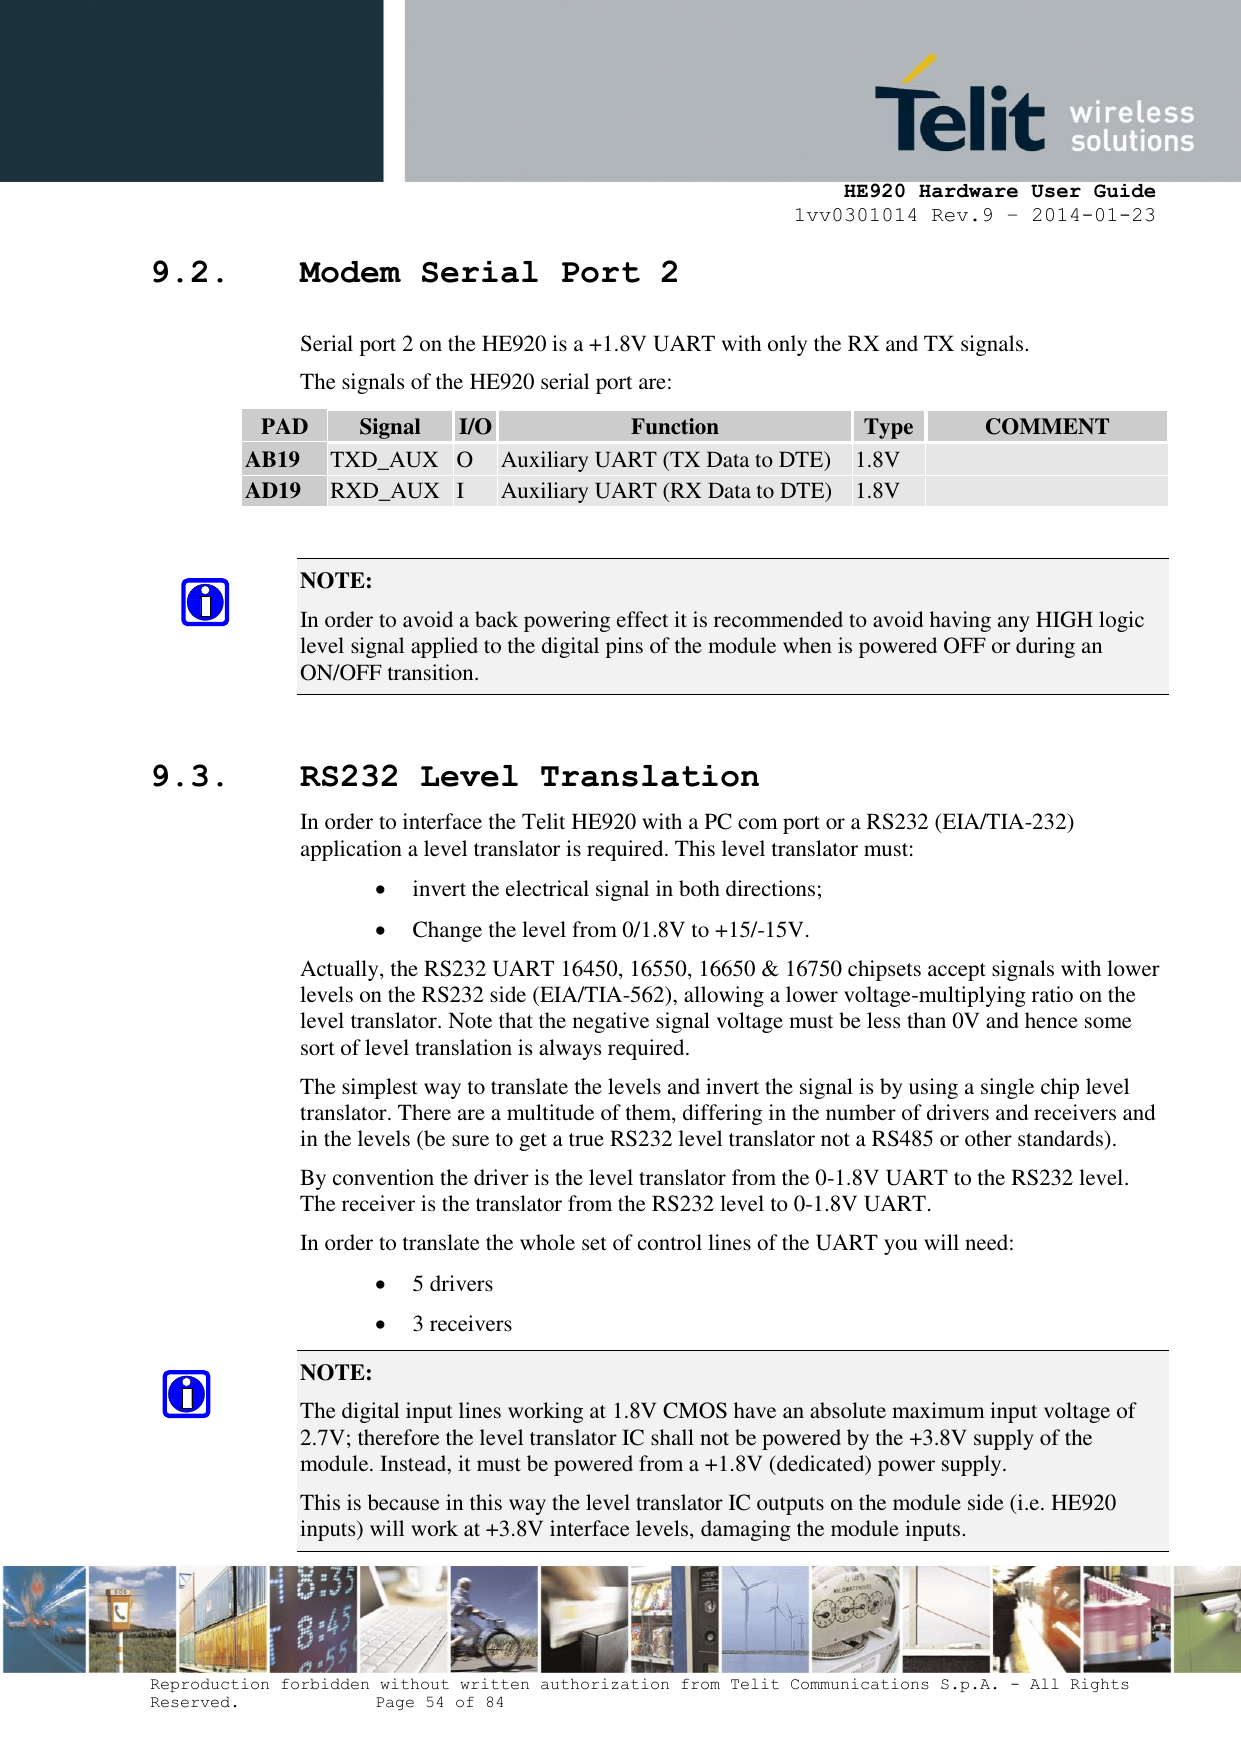     HE920 Hardware User Guide 1vv0301014 Rev.9 – 2014-01-23 Reproduction forbidden without written authorization from Telit Communications S.p.A. - All Rights Reserved.    Page 54 of 84  9.2. Modem Serial Port 2 Serial port 2 on the HE920 is a +1.8V UART with only the RX and TX signals.  The signals of the HE920 serial port are: PAD Signal I/O Function Type COMMENT AB19 TXD_AUX O Auxiliary UART (TX Data to DTE) 1.8V  AD19 RXD_AUX I Auxiliary UART (RX Data to DTE) 1.8V   NOTE:  In order to avoid a back powering effect it is recommended to avoid having any HIGH logic level signal applied to the digital pins of the module when is powered OFF or during an ON/OFF transition.  9.3. RS232 Level Translation In order to interface the Telit HE920 with a PC com port or a RS232 (EIA/TIA-232) application a level translator is required. This level translator must:  invert the electrical signal in both directions;  Change the level from 0/1.8V to +15/-15V. Actually, the RS232 UART 16450, 16550, 16650 &amp; 16750 chipsets accept signals with lower levels on the RS232 side (EIA/TIA-562), allowing a lower voltage-multiplying ratio on the level translator. Note that the negative signal voltage must be less than 0V and hence some sort of level translation is always required.  The simplest way to translate the levels and invert the signal is by using a single chip level translator. There are a multitude of them, differing in the number of drivers and receivers and in the levels (be sure to get a true RS232 level translator not a RS485 or other standards). By convention the driver is the level translator from the 0-1.8V UART to the RS232 level. The receiver is the translator from the RS232 level to 0-1.8V UART. In order to translate the whole set of control lines of the UART you will need:  5 drivers  3 receivers NOTE:  The digital input lines working at 1.8V CMOS have an absolute maximum input voltage of 2.7V; therefore the level translator IC shall not be powered by the +3.8V supply of the module. Instead, it must be powered from a +1.8V (dedicated) power supply. This is because in this way the level translator IC outputs on the module side (i.e. HE920 inputs) will work at +3.8V interface levels, damaging the module inputs. 